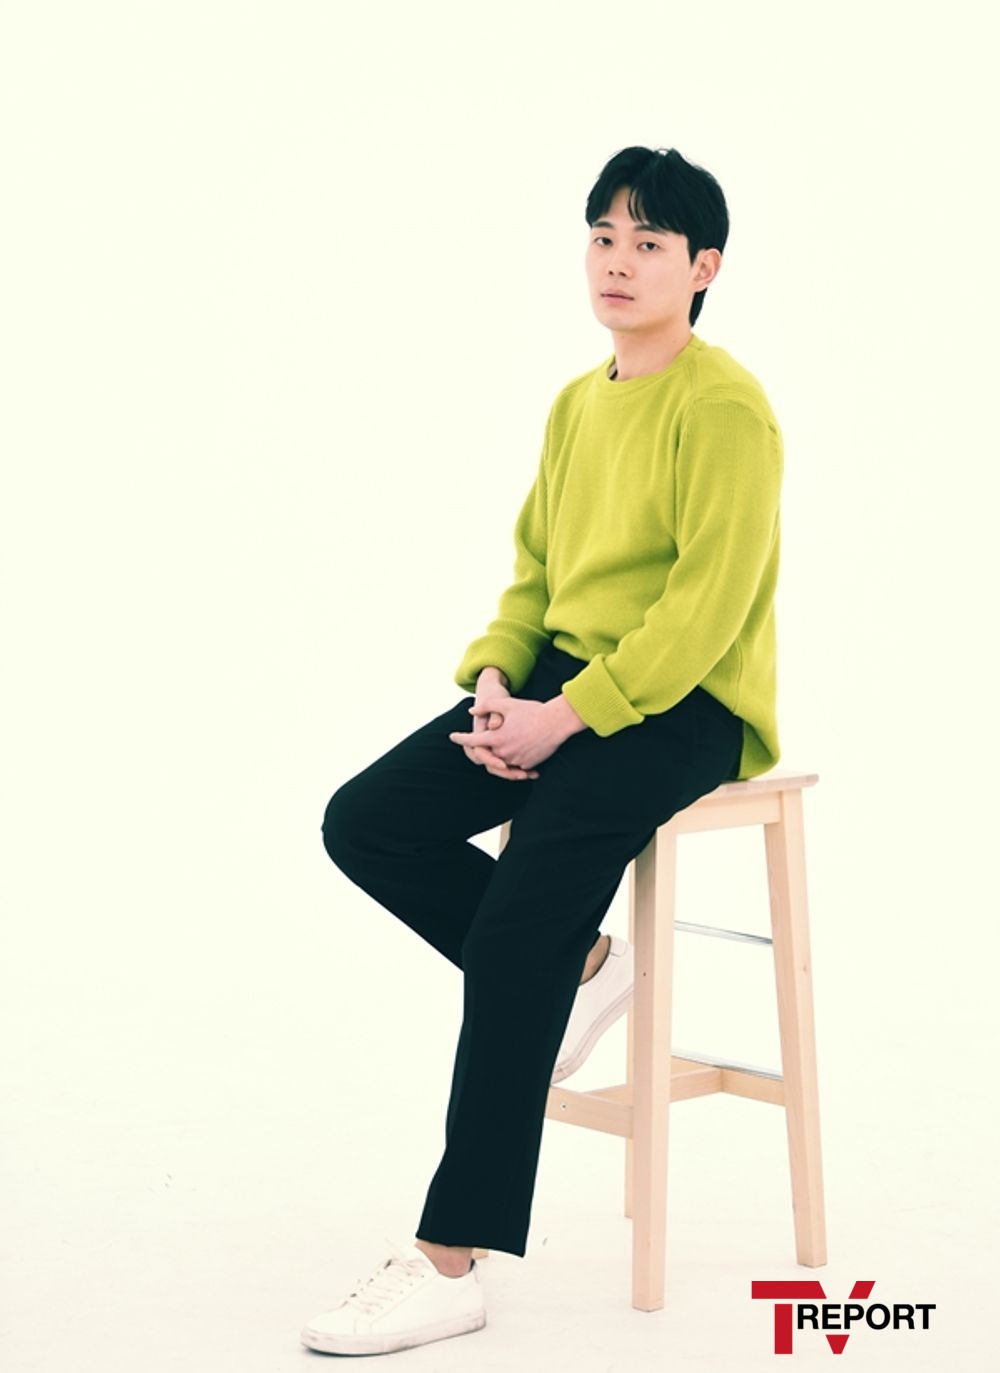 Are you like Roy (Park Seo-joon) to me? Friends I met at college, people in the same field, and they caught me when I was a little bit struggling or reeling.At JTBC Itaewon Clath end interview, Ryu Kyong-su cited theater movies and friends who had a relationship with college when asked who led solid beliefs and beliefs like Roy.As he met them, Ryu Kyong-su was his twintiesI said that the whole thing had been reversed.I just entered the university and entered the school with the idea that I wanted to learn Acting, whether it was theory or practice.Regardless of the severity of the story, I felt that I was short of meeting them, and I felt that there were many empty spaces filled in me while talking with them.So I had a hot campus life, and it remained a good memory. Ryu Kyong-su, who turned 29 this year, his own twinties he looked back onIt was a fierce and grateful time.I think I am a lot of people who are not enough, but I think I have met a lot of people like Roy around here and they have listened to my story.Im trying to listen to them.Ryu Kyong-su, who has accumulated one or two filmography with precious people, imprinted the public with the movie Anger - Yu Gwan-soon Story and TVN Confession last year.This was a decisive opportunity to join Itaewon Clath.Director Kim Sung-yoon said he wanted to see me after seeing the confession. I was very curious.I was a fan who had already read Itaewon Clath webtoon before I became a drama, but I felt that Choi Seung-kwon was attractive.It was really amazing to be offered this role, and at the same time my shoulders were heavy. Cho Kwang-jin, the author of the same name Webtoon and the scriptwriter, told him to make it comfortable.The writer said we should not be trapped in the original, but we should share our ideas as much as possible and make it comfortable.(Acting Choi Seung-kwon) I studied how many funny and funny things come out to viewers, and I thought I could reveal a lot of gaps in the winning ticket rather than deliberately laughing.Sams Club dance, which gave viewers a laugh, was one of them, he explained.I didnt mean to be funny, because I imagined Choi Seung-kwon would have come to Sams Club with a spleen and serious heart and thought he was cool.I was only out, and I thought that the winner was in the Sams Club and that he would have become famous. In this process, he fell into a role and completed it with an adverb. And theres a story about Park Seo-joon, who was breathed into Itaewon Klath, who said he had worked together three times in total so far.When I was a youth cop, I did not bump into me much, I thought it was a cool actor from afar. Then I met him in Lion, and I was grateful that he recognized me first.Then I met again with Itaewon Klath and it was very strange! There are many things that listen to me comfortably and care about me now and now. Ryu Kyong-su with similar age actors at the Pocha night in Itaewon Klath including Park Seo-joon.So I was bright and cheerful throughout the scene. So I want to keep seeing it.We have our own humor and gag styles, and it seems that it was a major factor in brightening and fun the atmosphere because it moves around the scene.I like reactions when someone tells me funny stories, not just the family at night, but others, and what I got from doing Itaewon Klath is the people I worked with.The appearance of Ryu Kyong-su, who met at Interview on the day, was like a stone, because every word felt seriousness and heavyness.His conviction and long-term plan revealed a different weight.I am very grateful for the modifier Monster Newcomer, but I am more committed to getting harder and harder myself.As such, I think I should keep my conviction that I will not let go of Acting.I do not build like Roy, but if it is a plan to act for a long time until the age of seven or eighty, is it a plan? After Itaewon Klath, Ryu Kyong-su will meet with the public with Daemuga: Han and Heung, an extension of the short film Daemuga, which was previously featured.I come into the world of shamans and darkness of each generation, and I become shamans in an accidental moment, and this work also tells the story of people living.After completing the interview, he left gratitude and support for viewers who loved Drama.Ive been on TV these days, but I think things are very depressing. Youre all going to be tough. I hope youre strong. Ill try.I will reassign and return to a good story.